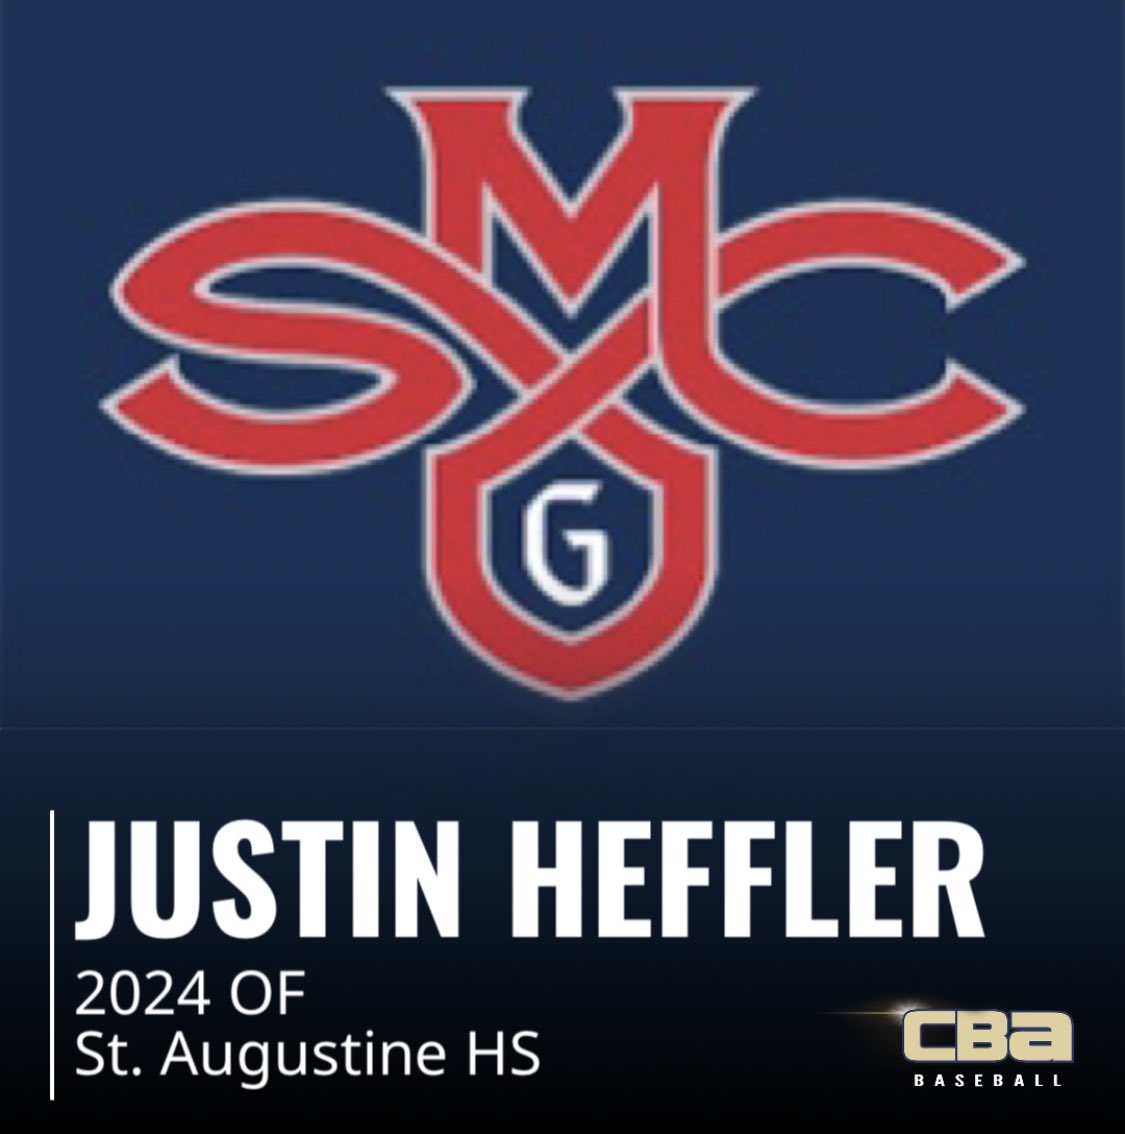 Congratulations Justin Heffler | 2024 OF St. Augustine HS | committed to St. Mary’s #weareCBA